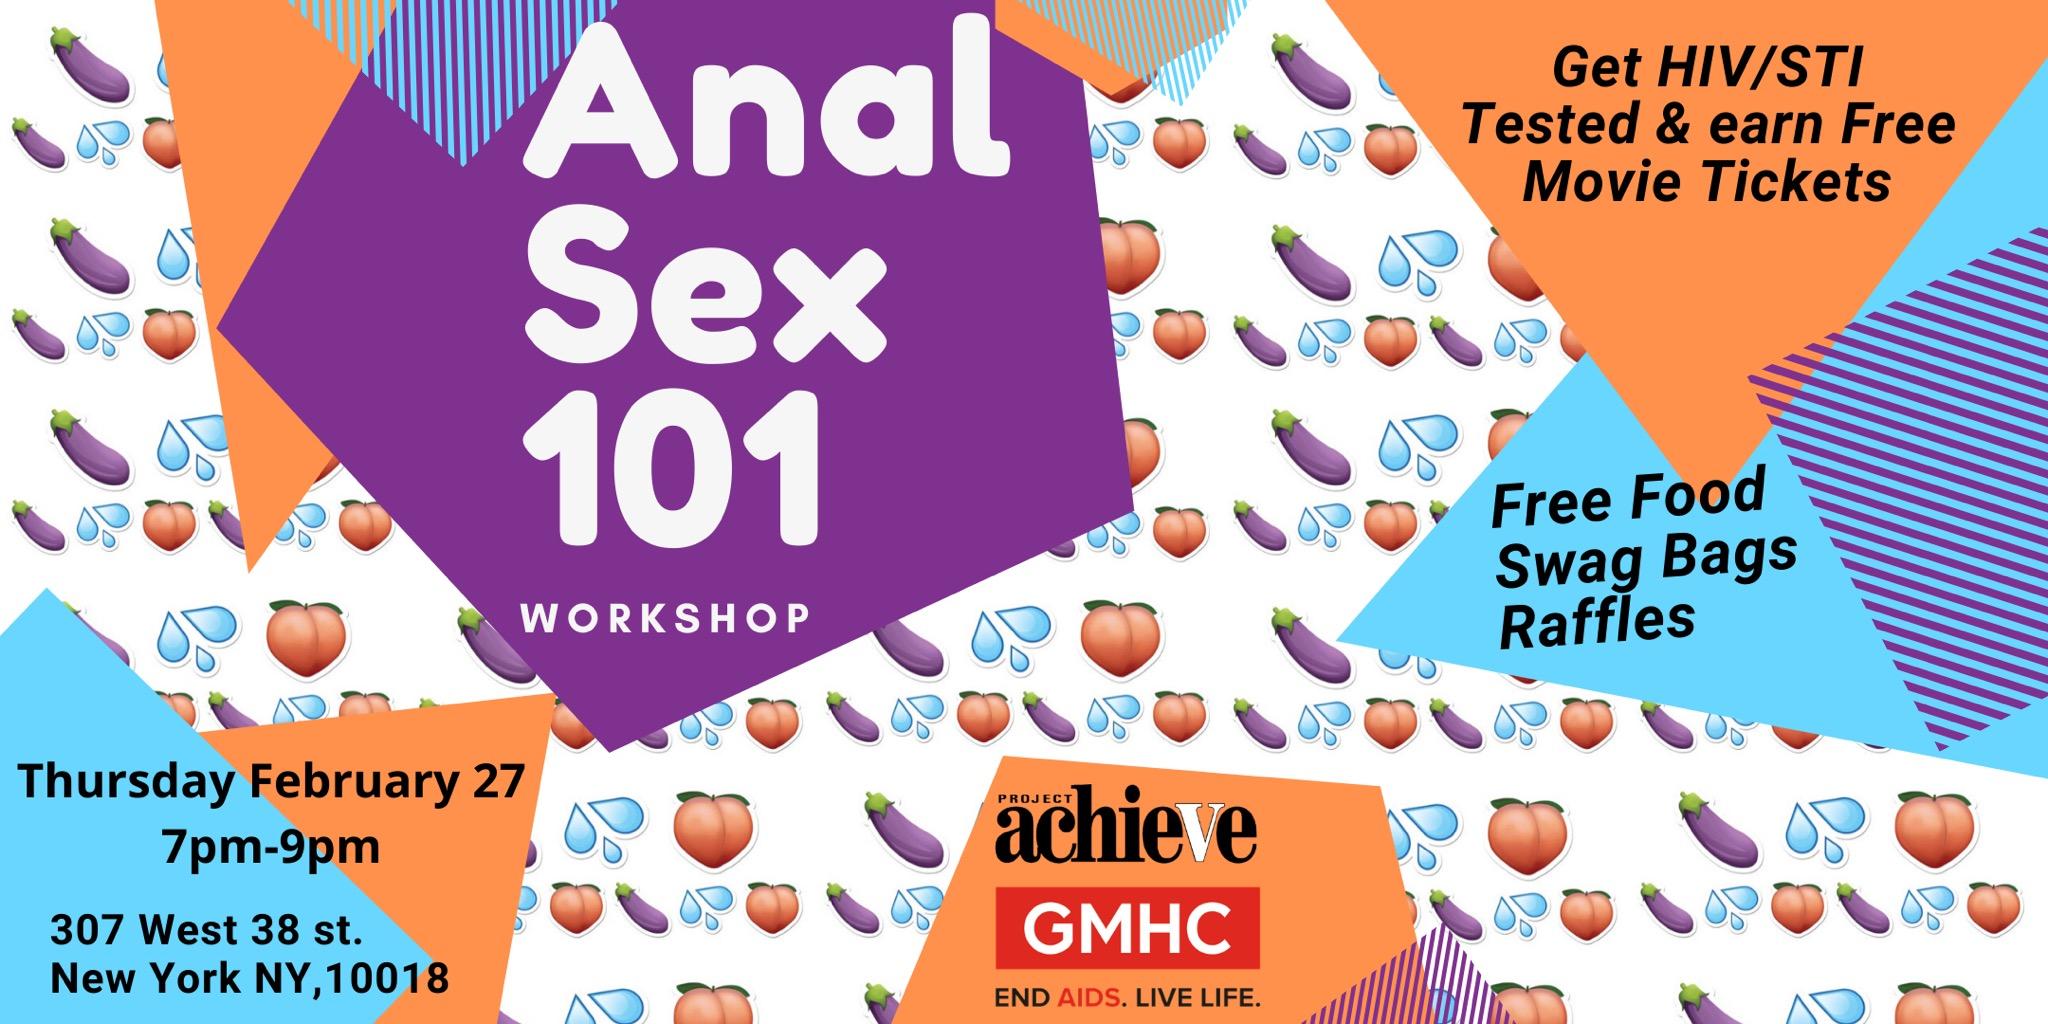 Copy of Anal Sex 101